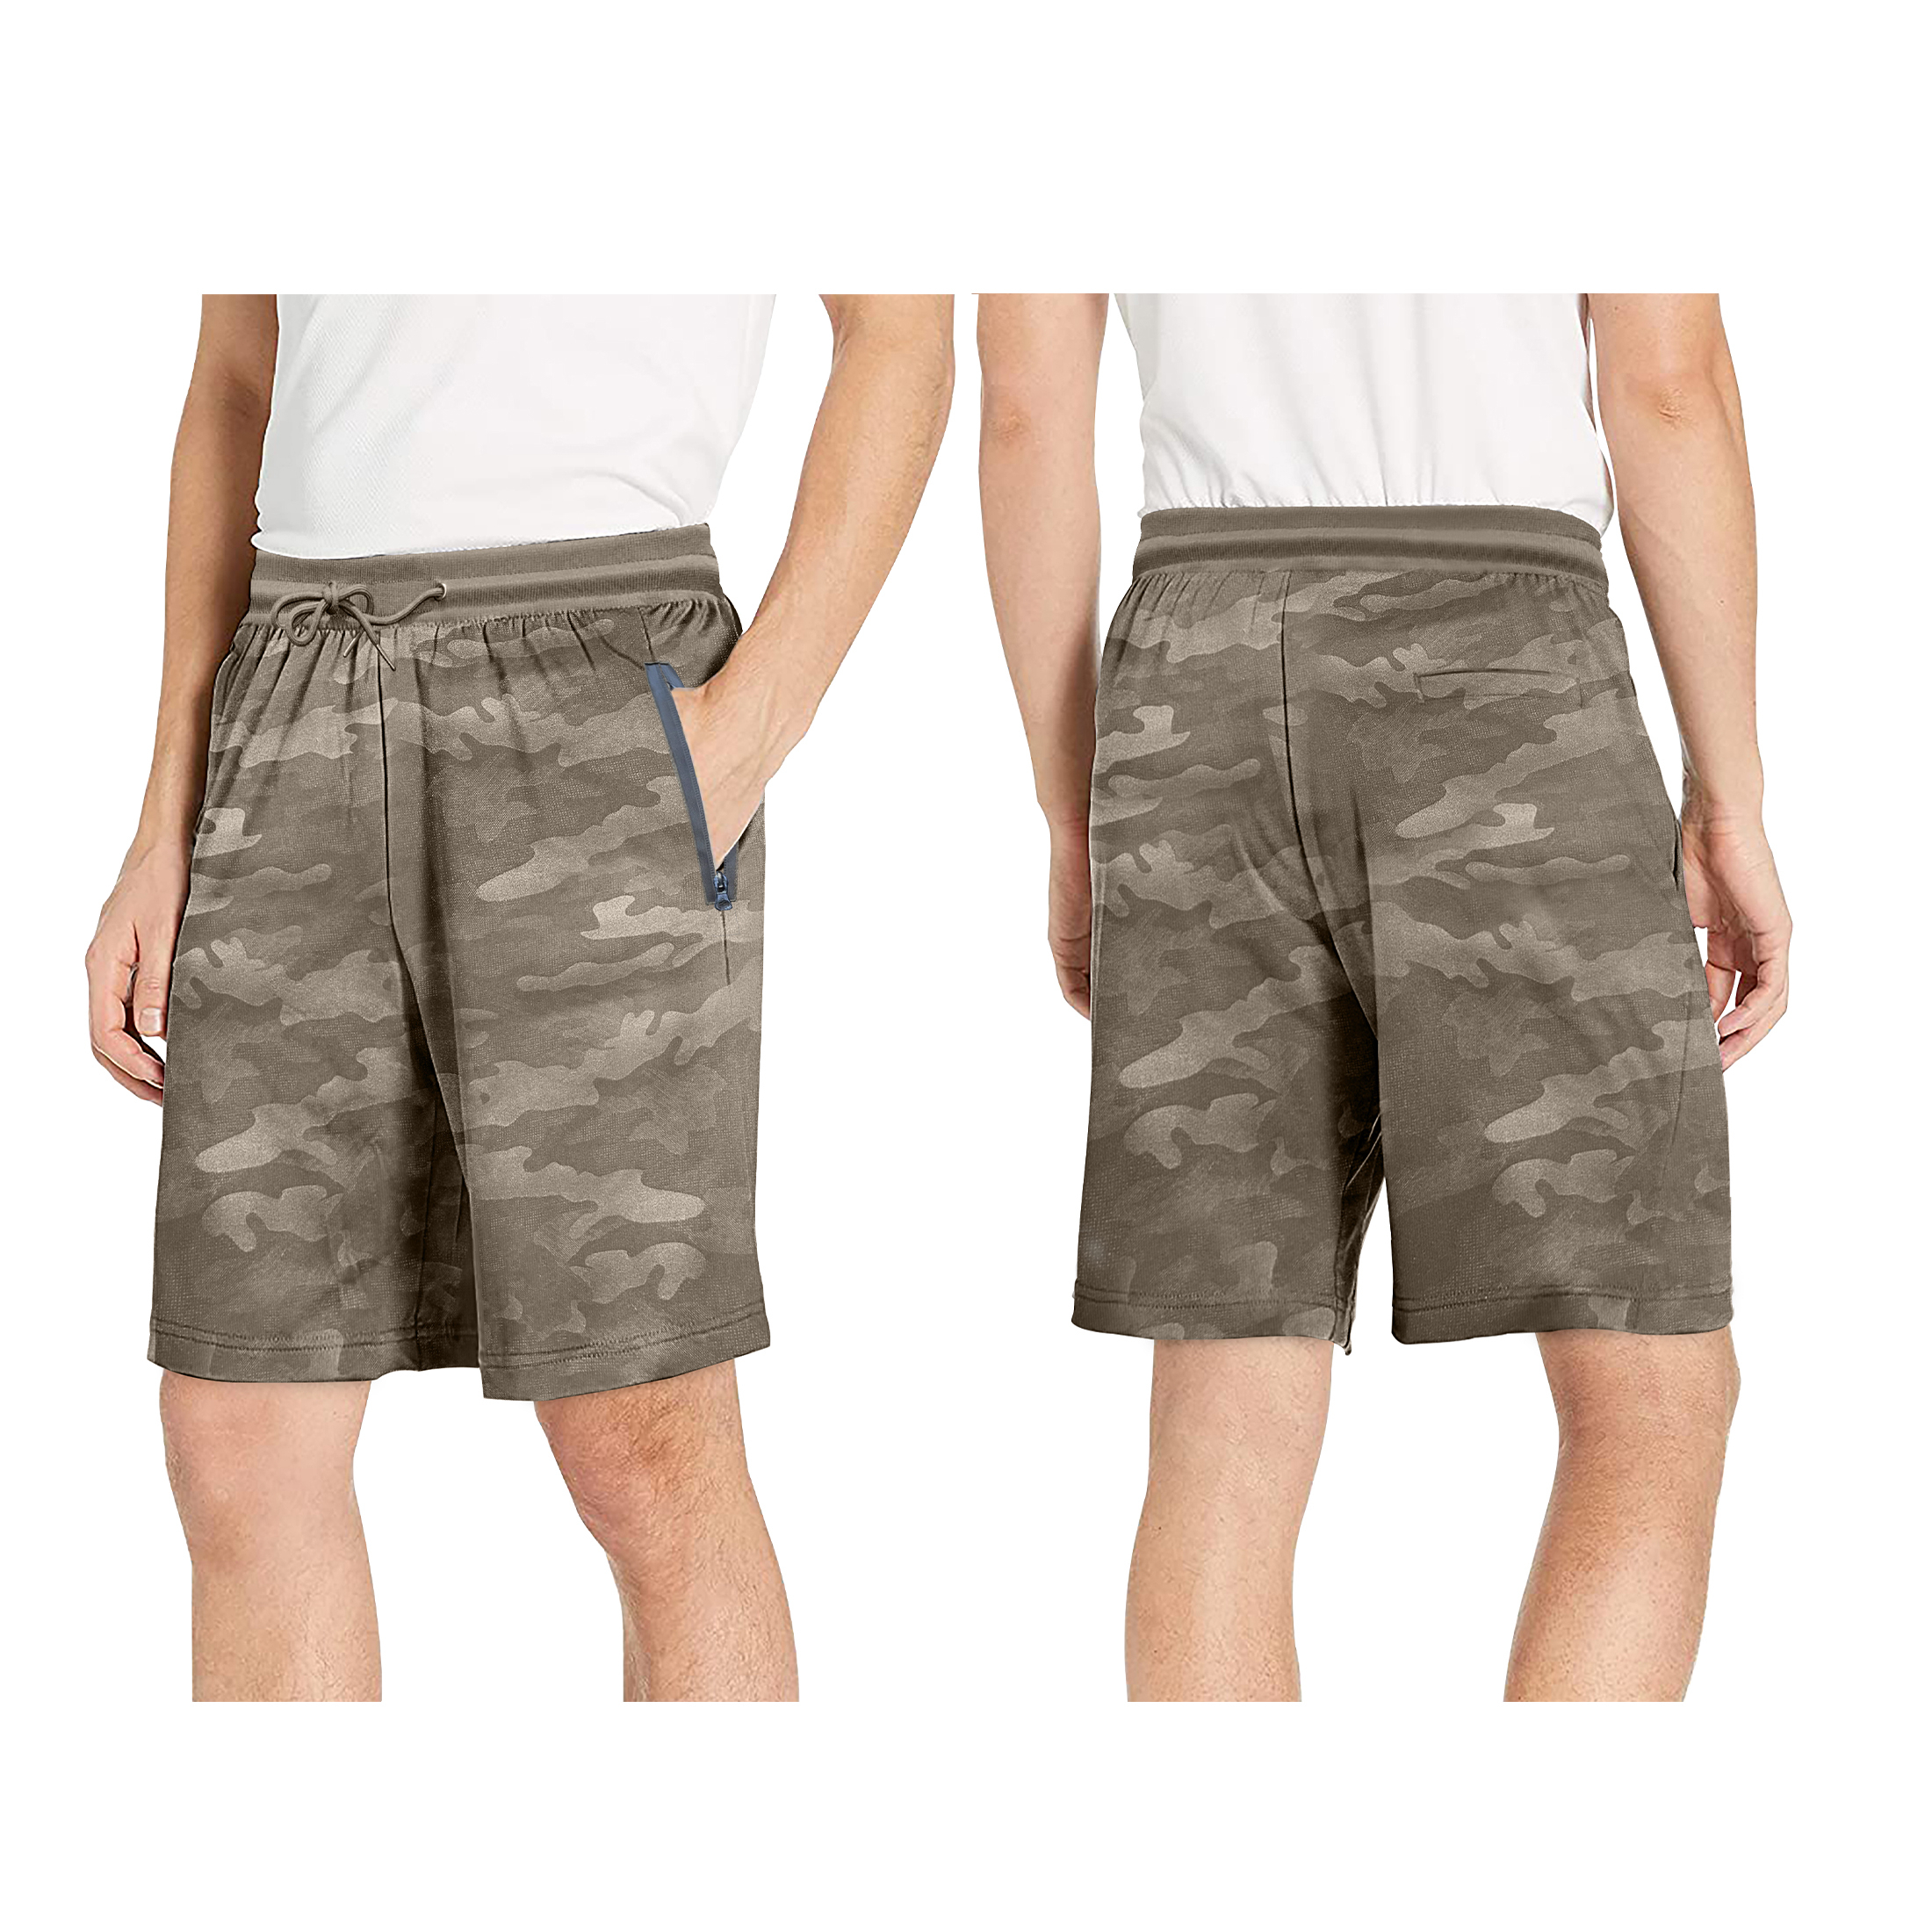 Men's Quick Dry Camo-Print Athletic Performance Active Running Scuba Shorts - Olive, Large